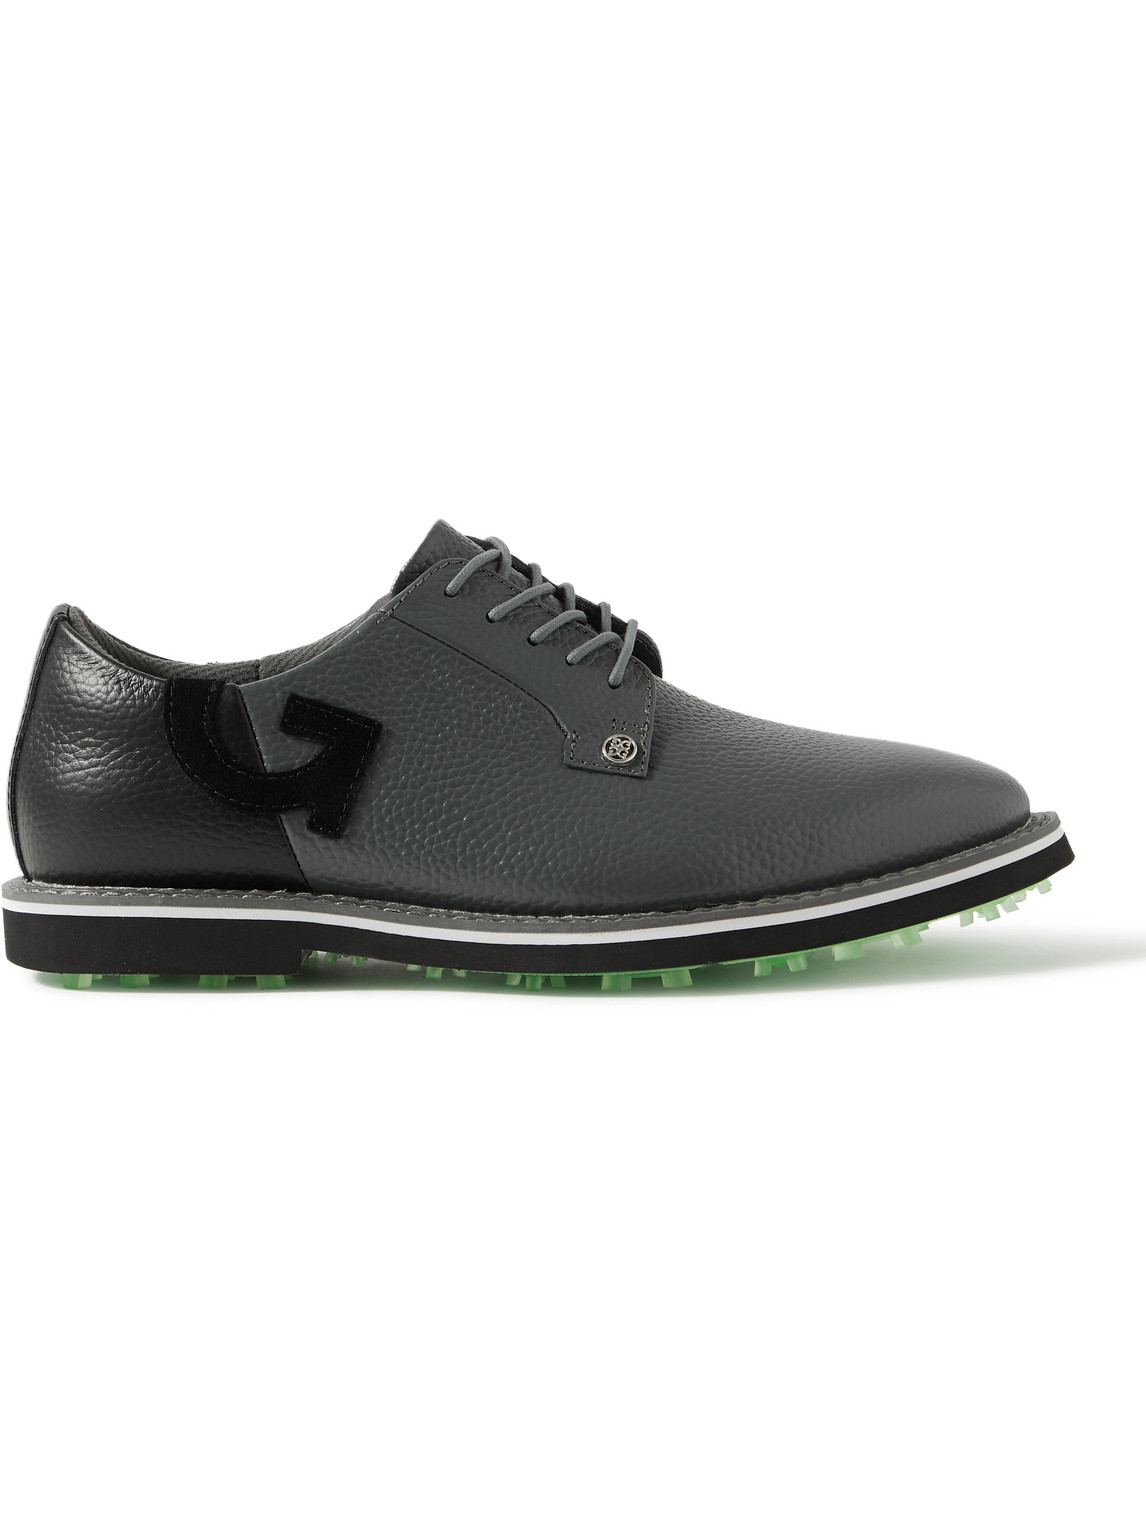 G/FORE Gallivanter Suede-Trimmed Pebble-Grain Leather Golf Shoes